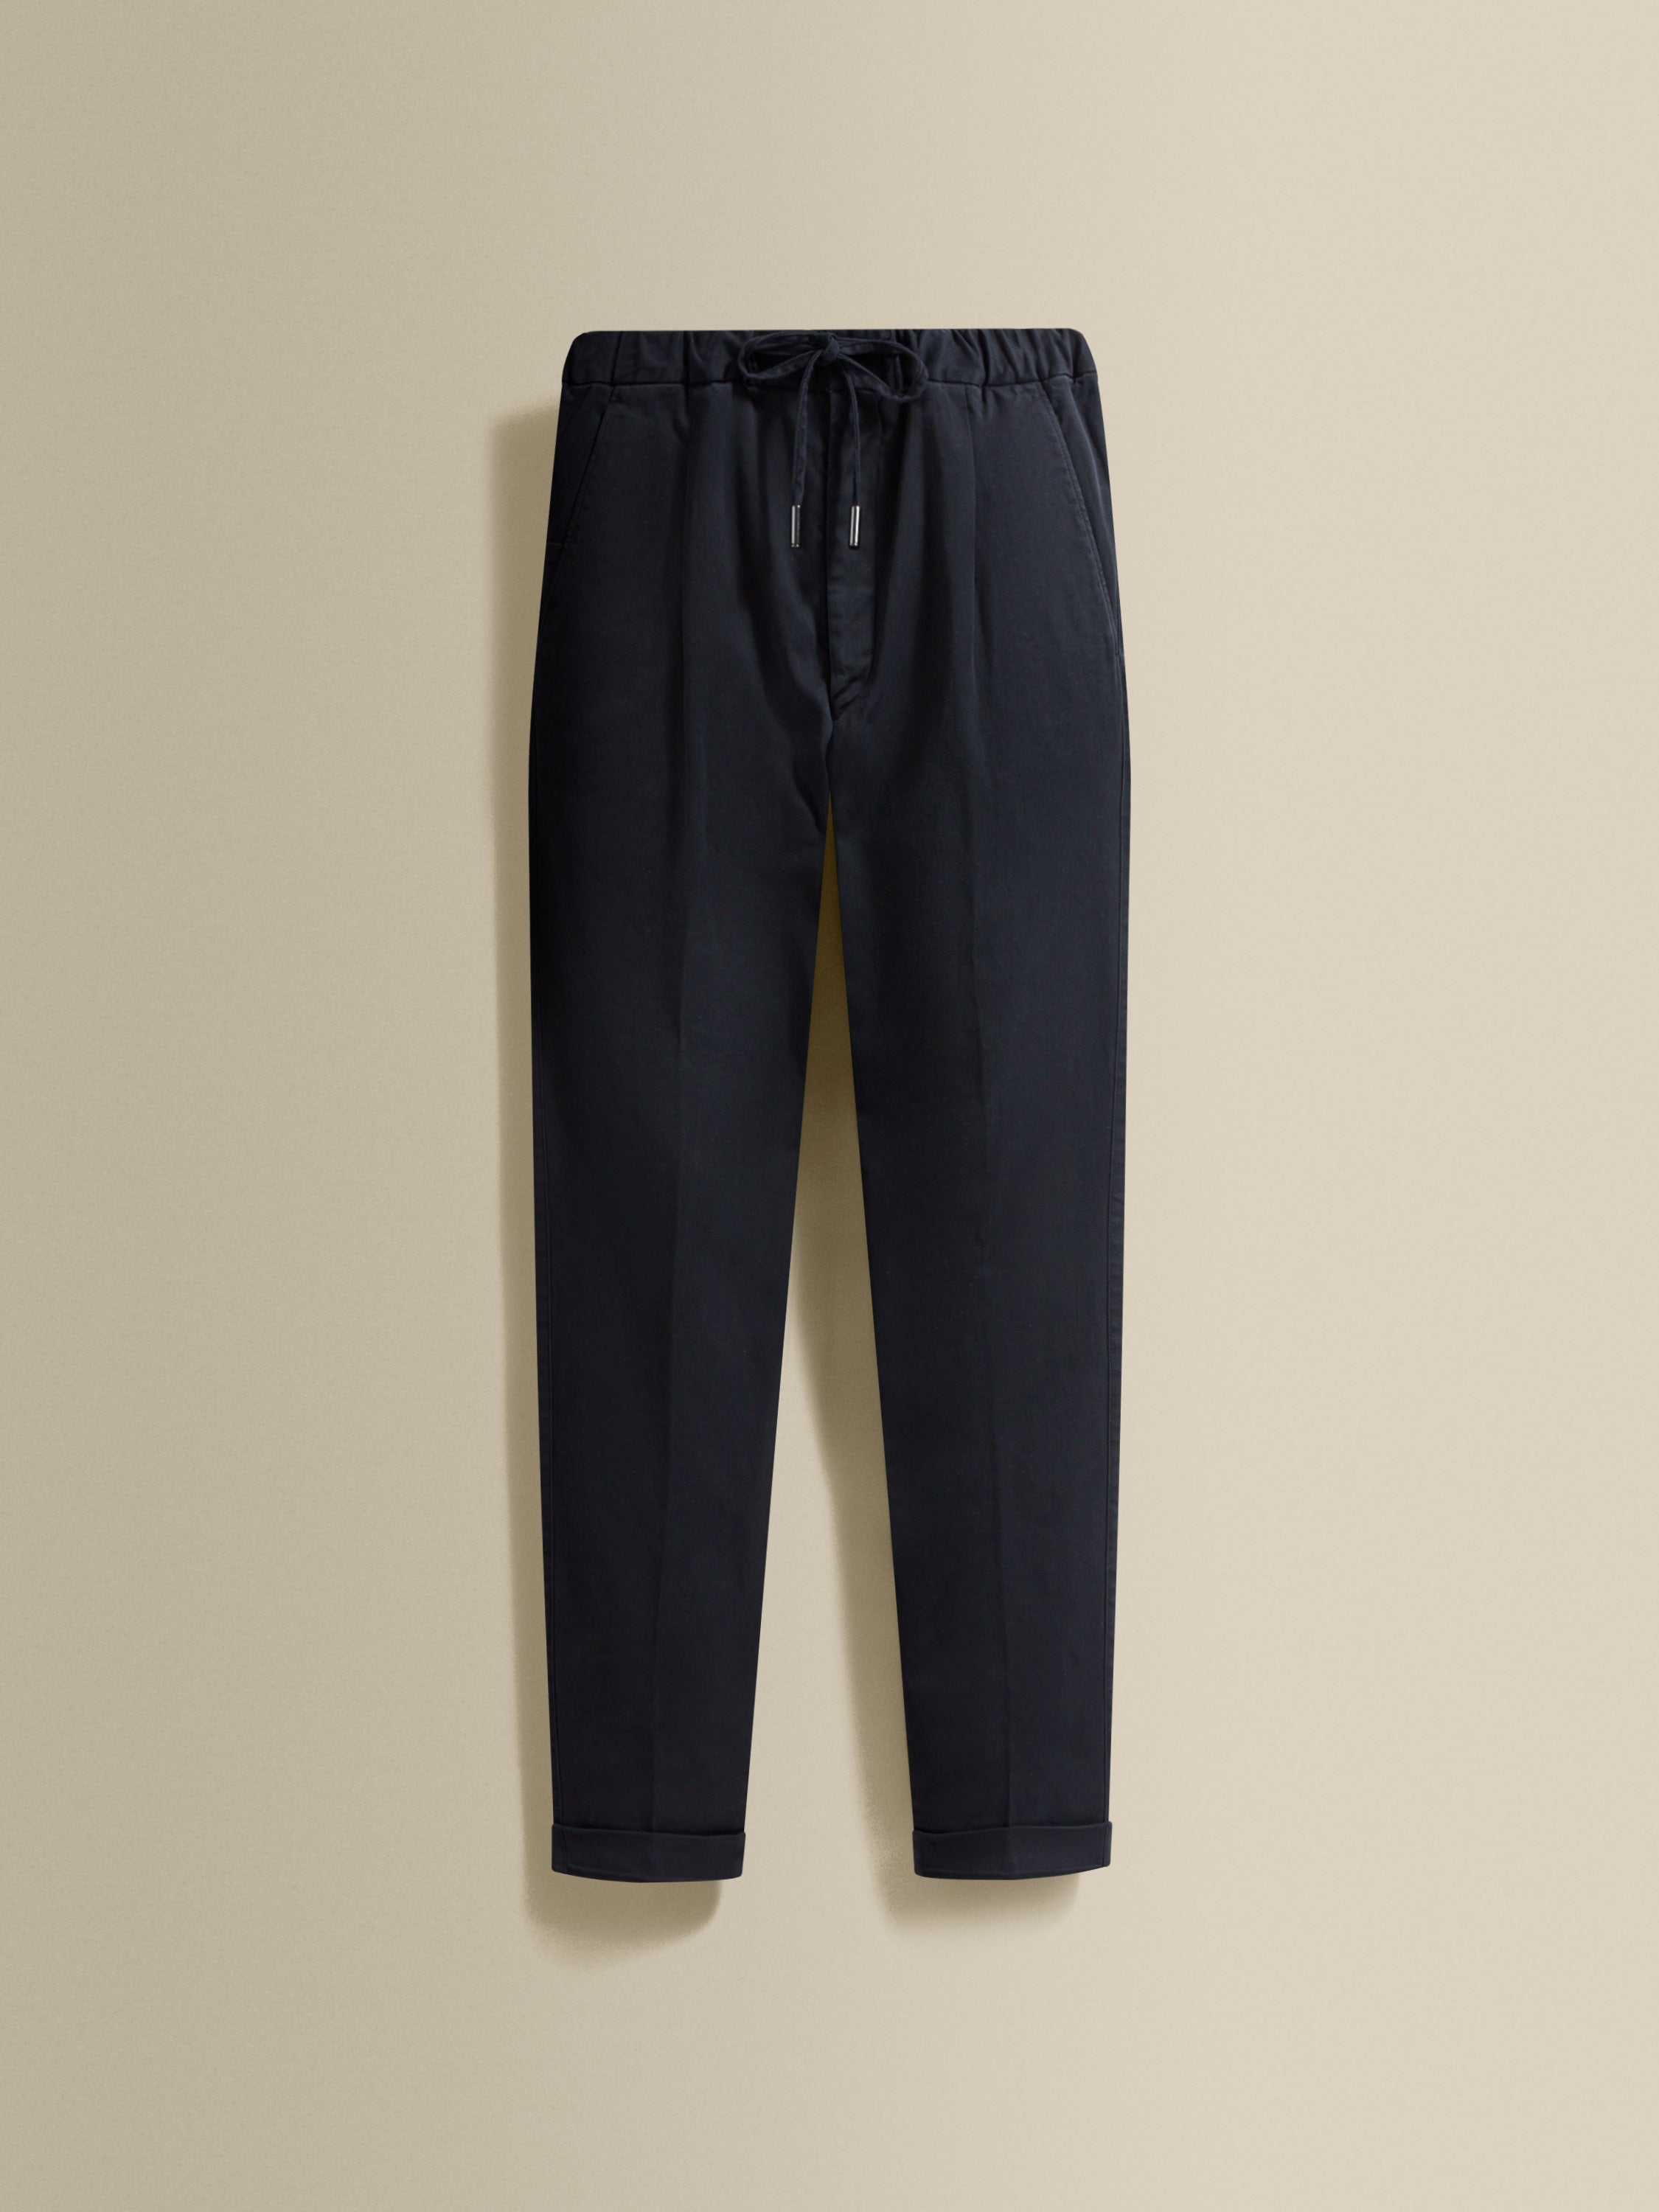 Cotton Twill Drawstring Tailored Trousers Navy Product Image